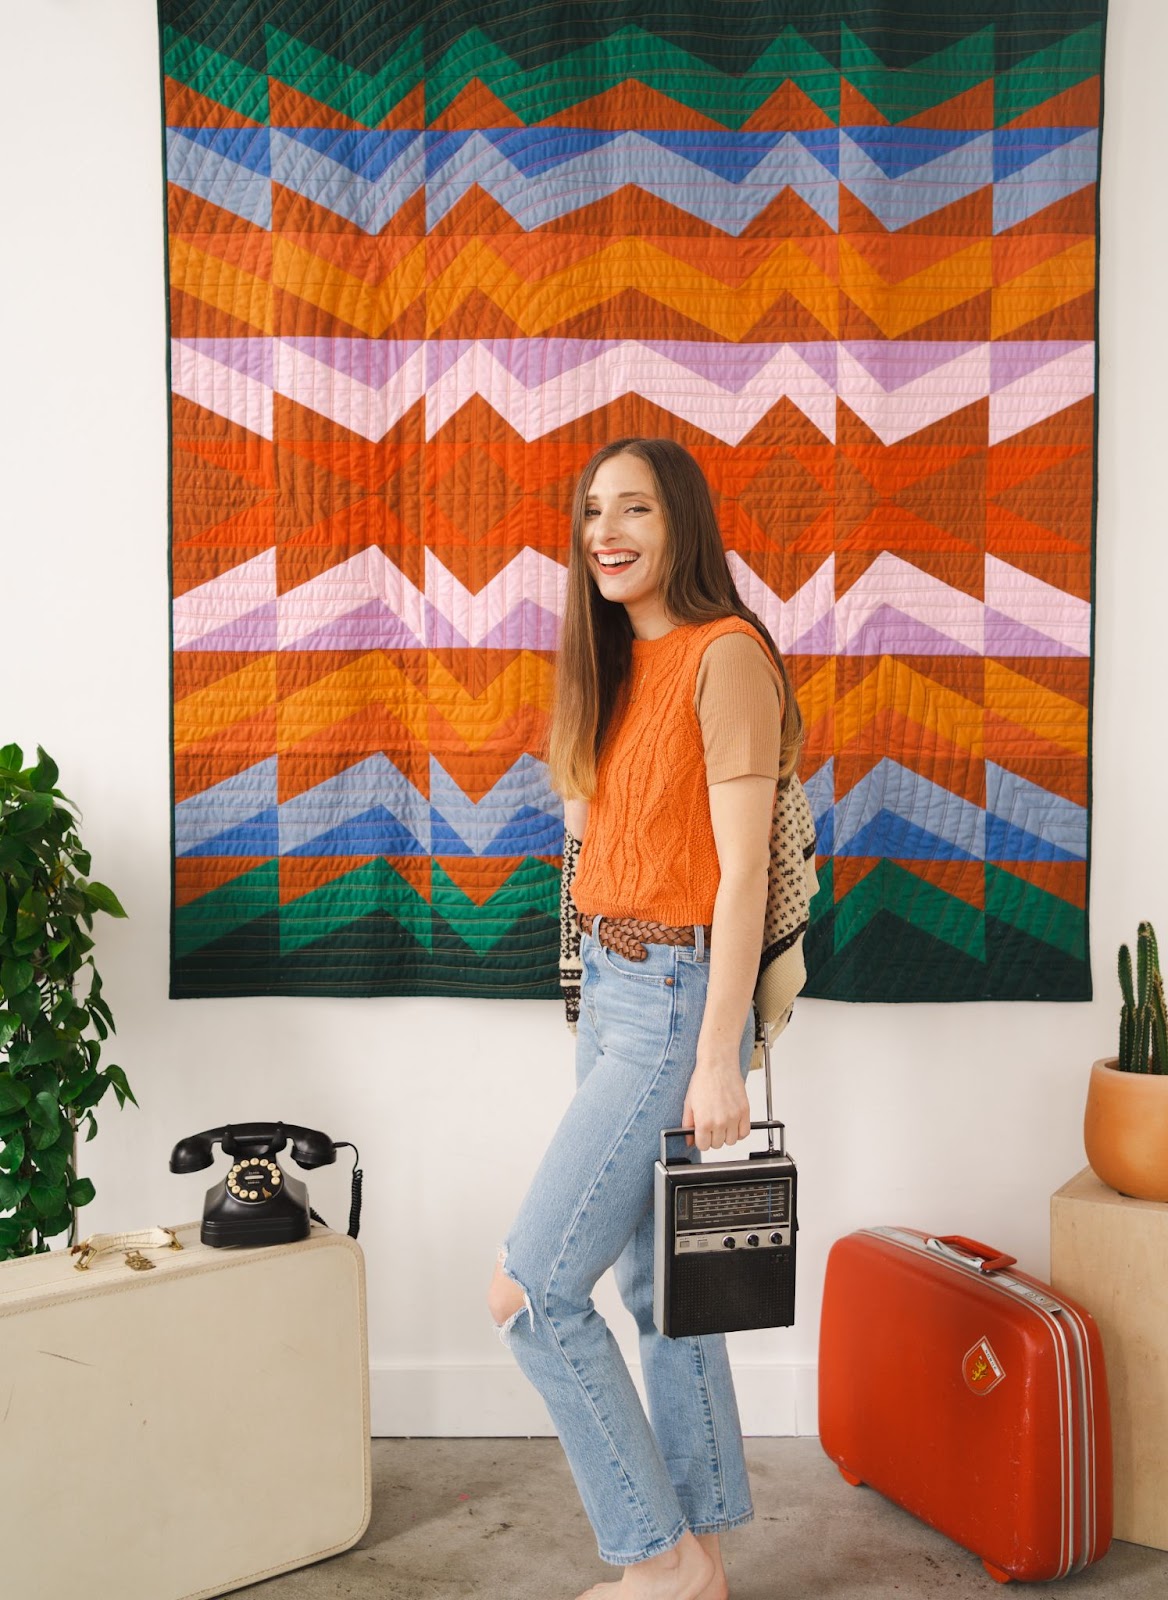 Taylor Krz standing in front of Rocky Coast Quilt holding vintage stereo and sweater